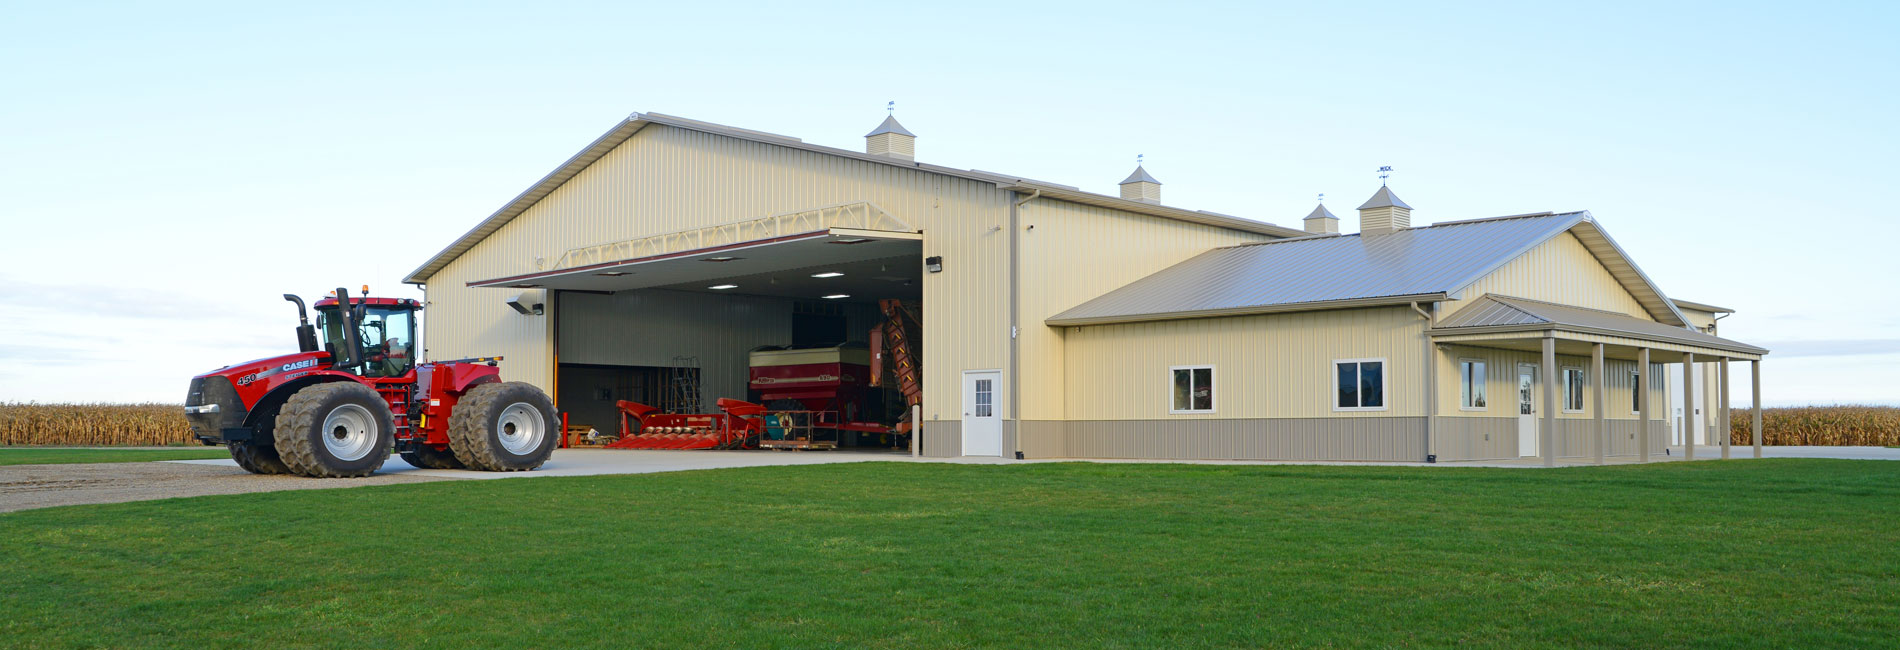 Ag Machine Sheds Shops and more